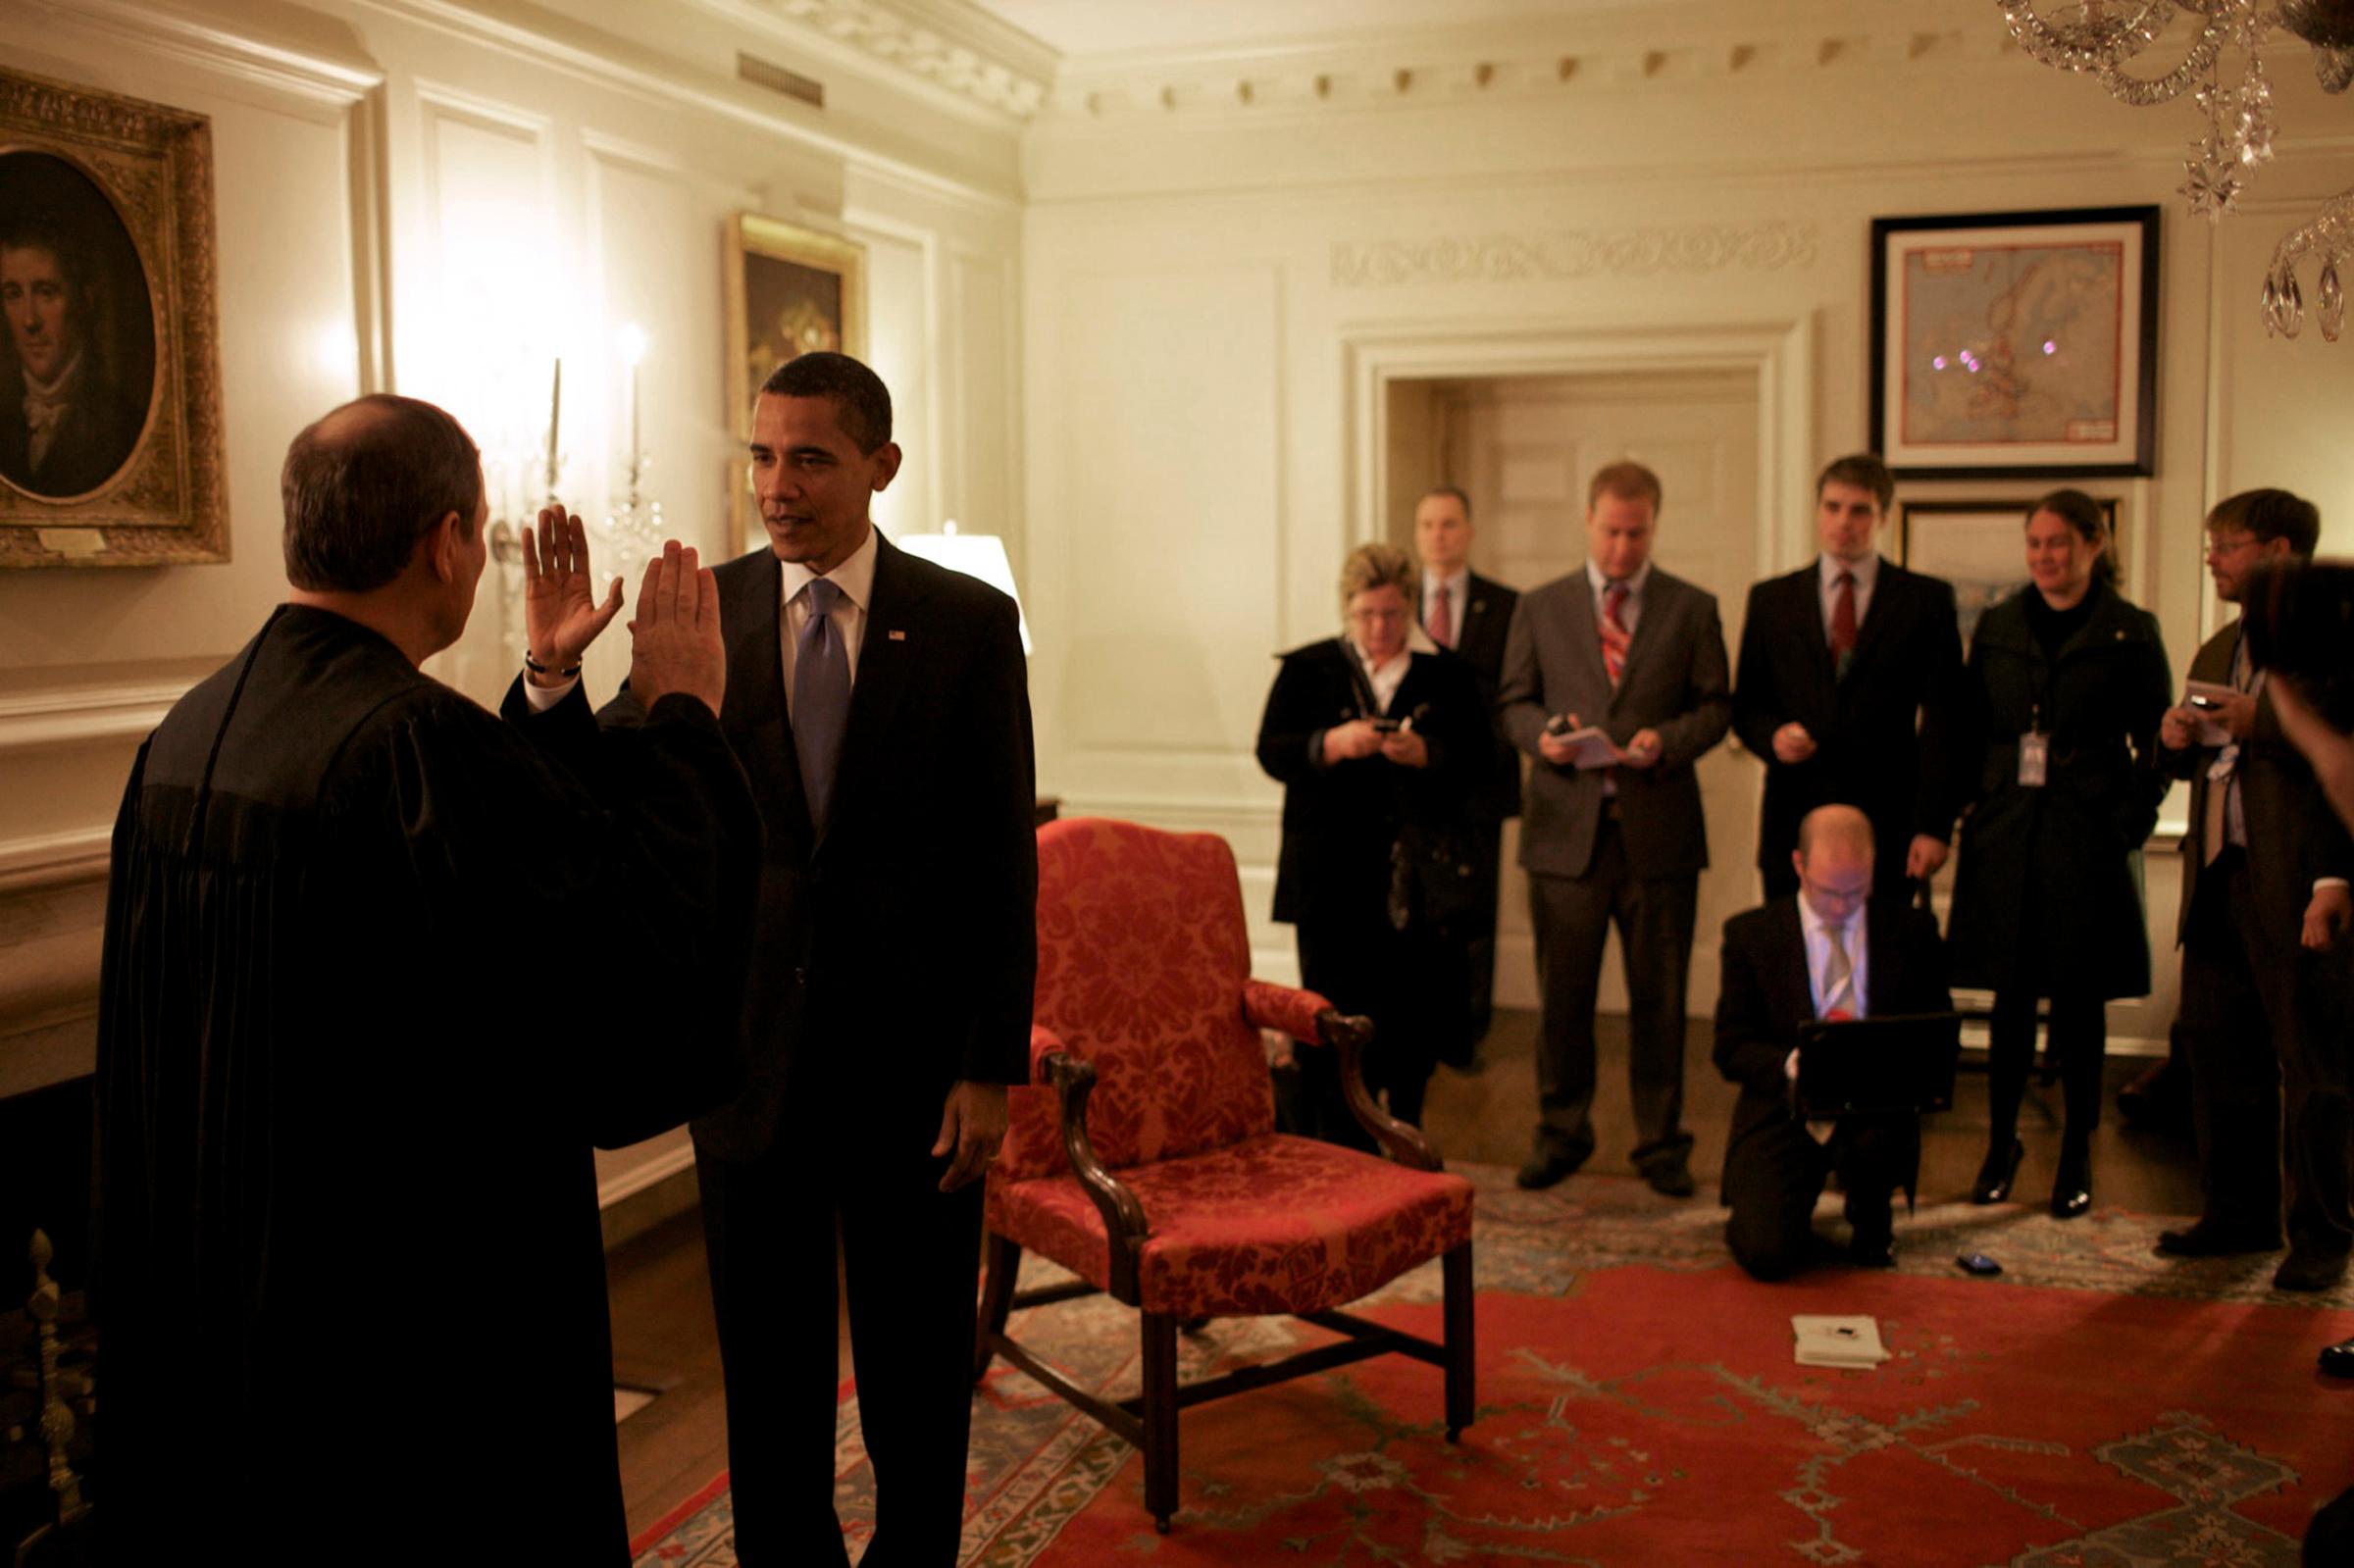 President Barack Obama and Supreme Court Justice John Roberts in the Map Room on the ground floor of the White House Residence.